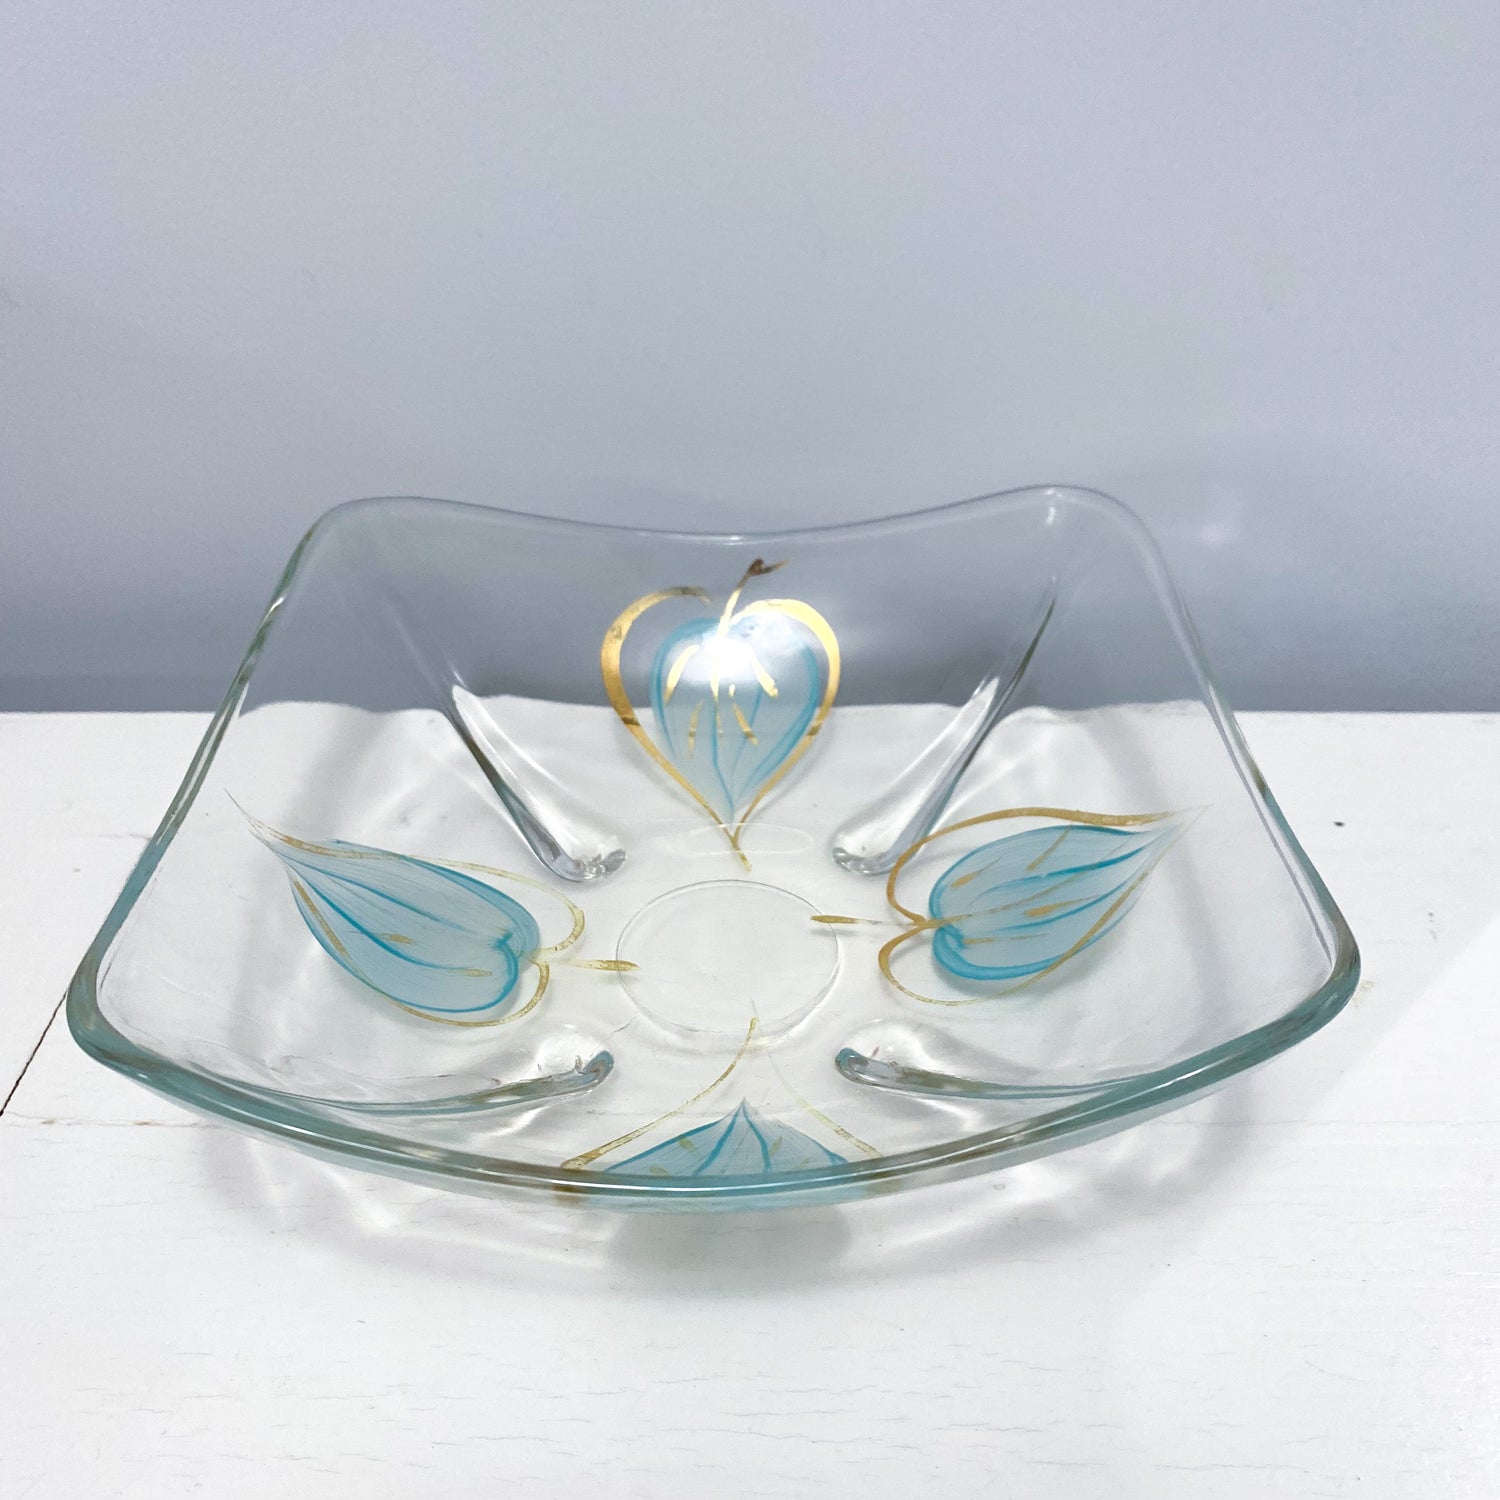 Small Candy Dish with Teal & Gold Leaves - Classic & Kitsch